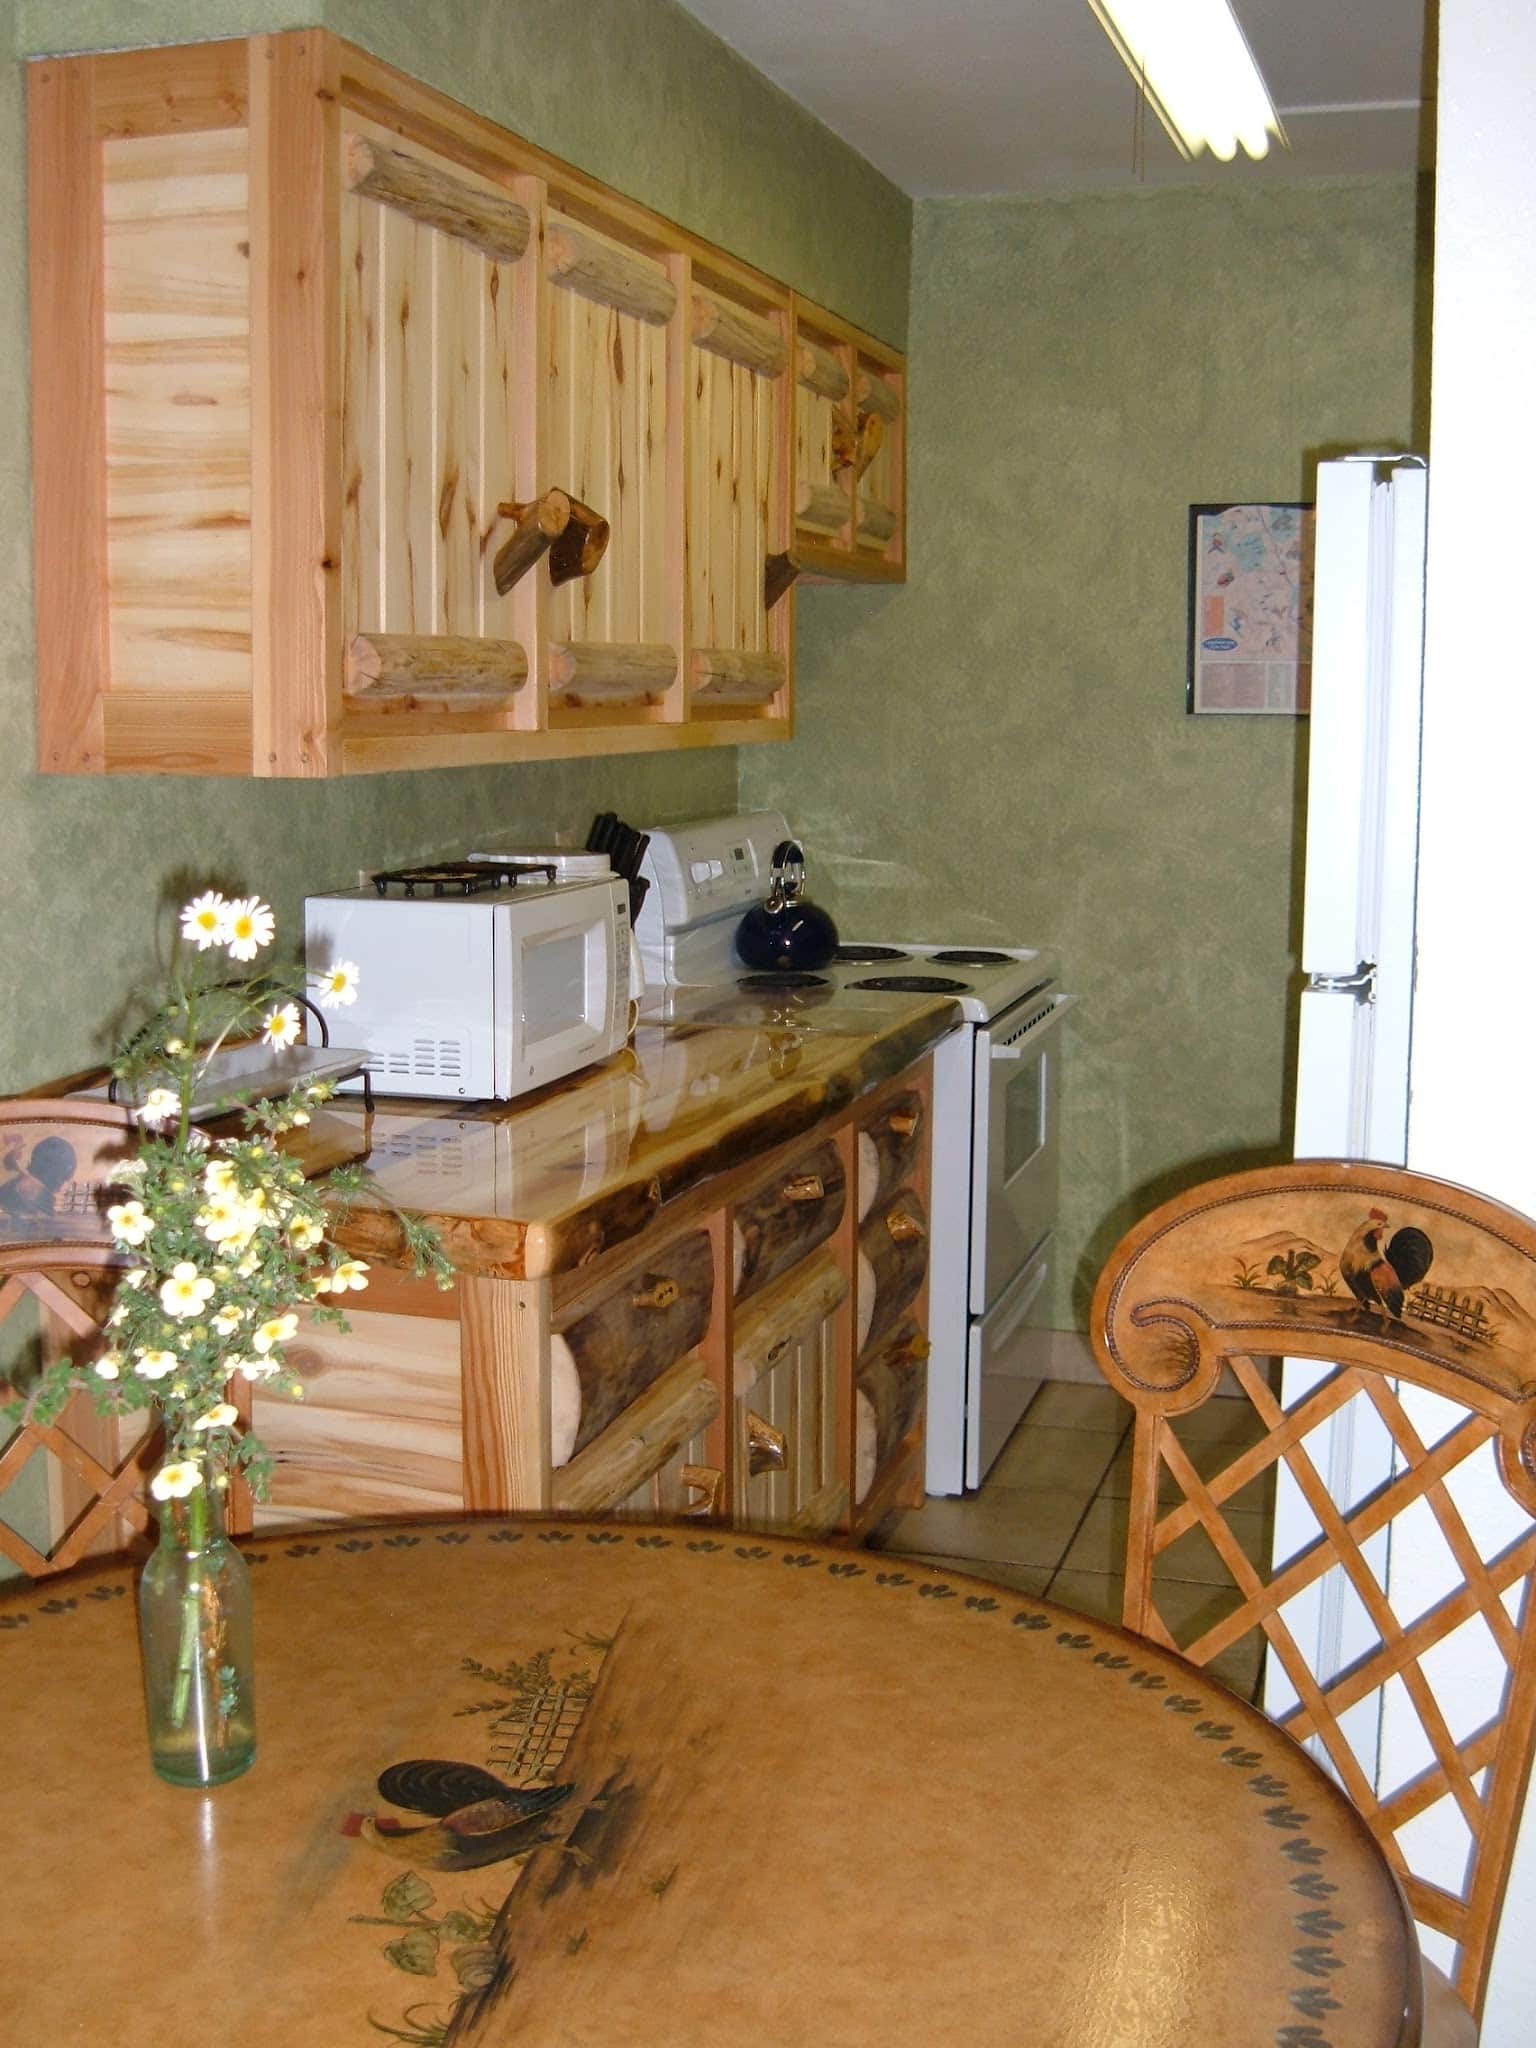 Kitchen with beautiful rustic log cabinets, tile floors, and faux green walls.  Dinning table with faux painting of a rooster.